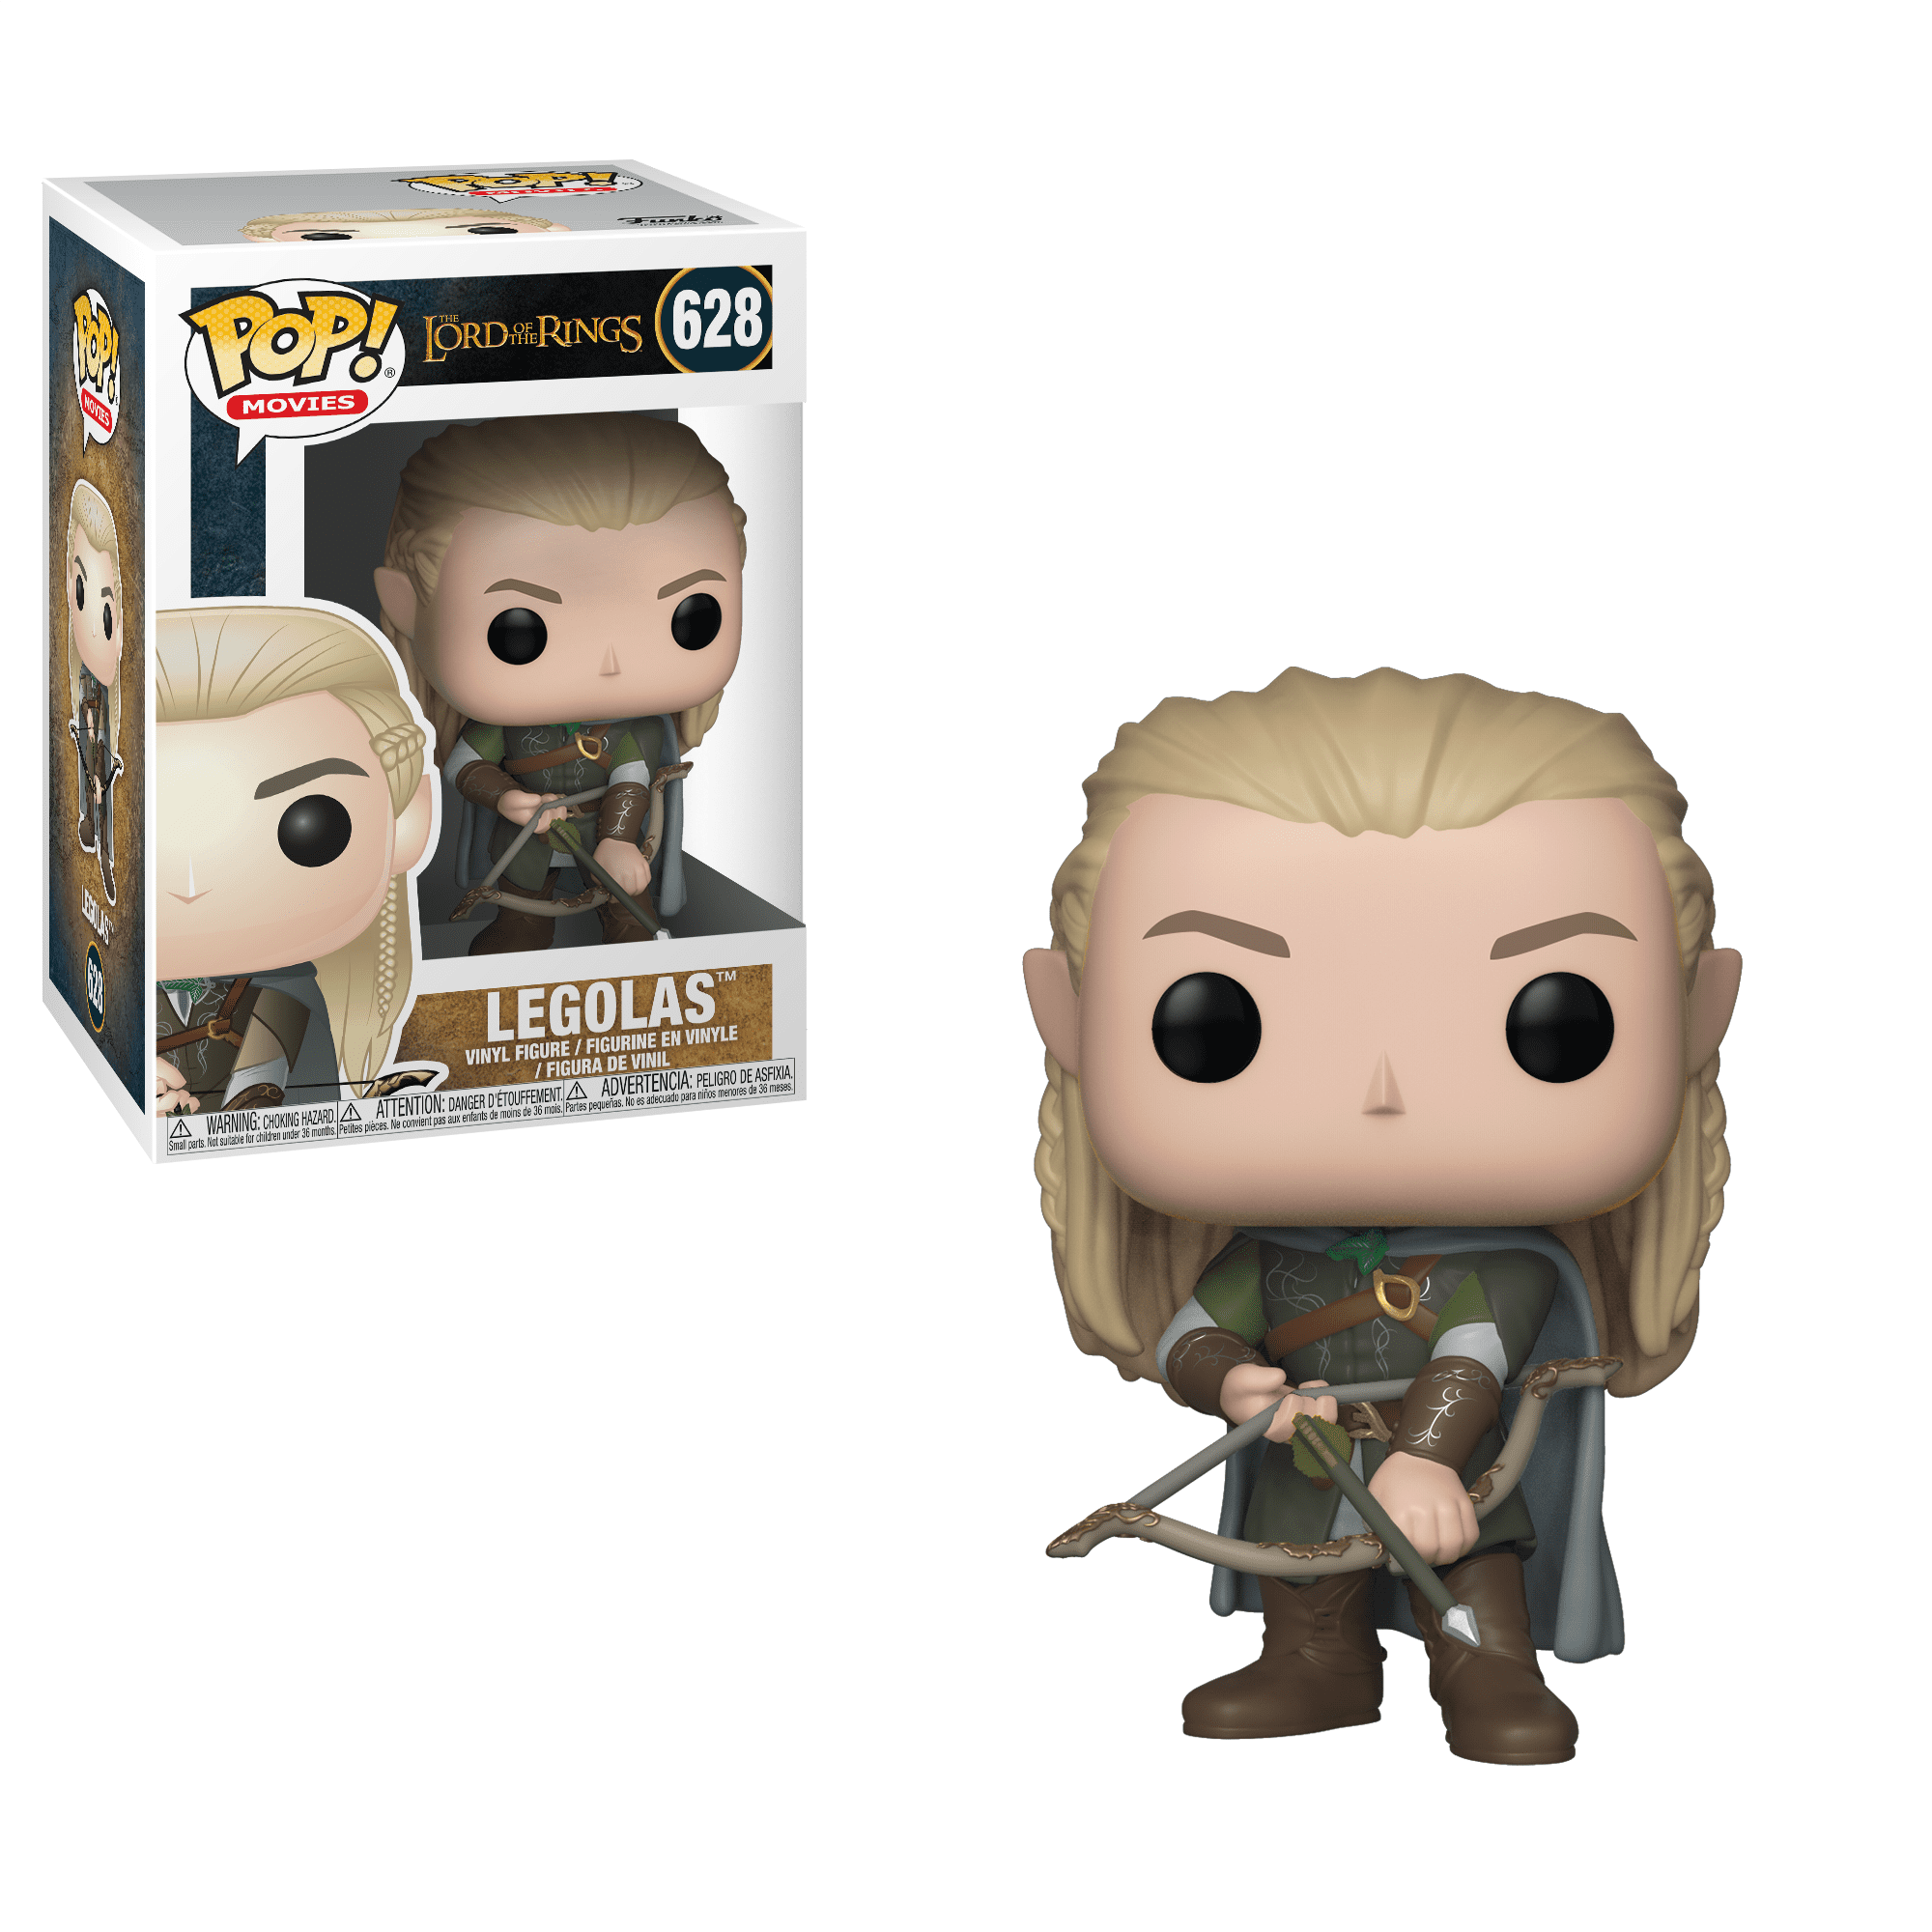 Vinyl Pippin Took Pop Funko--The Lord of the Rings 